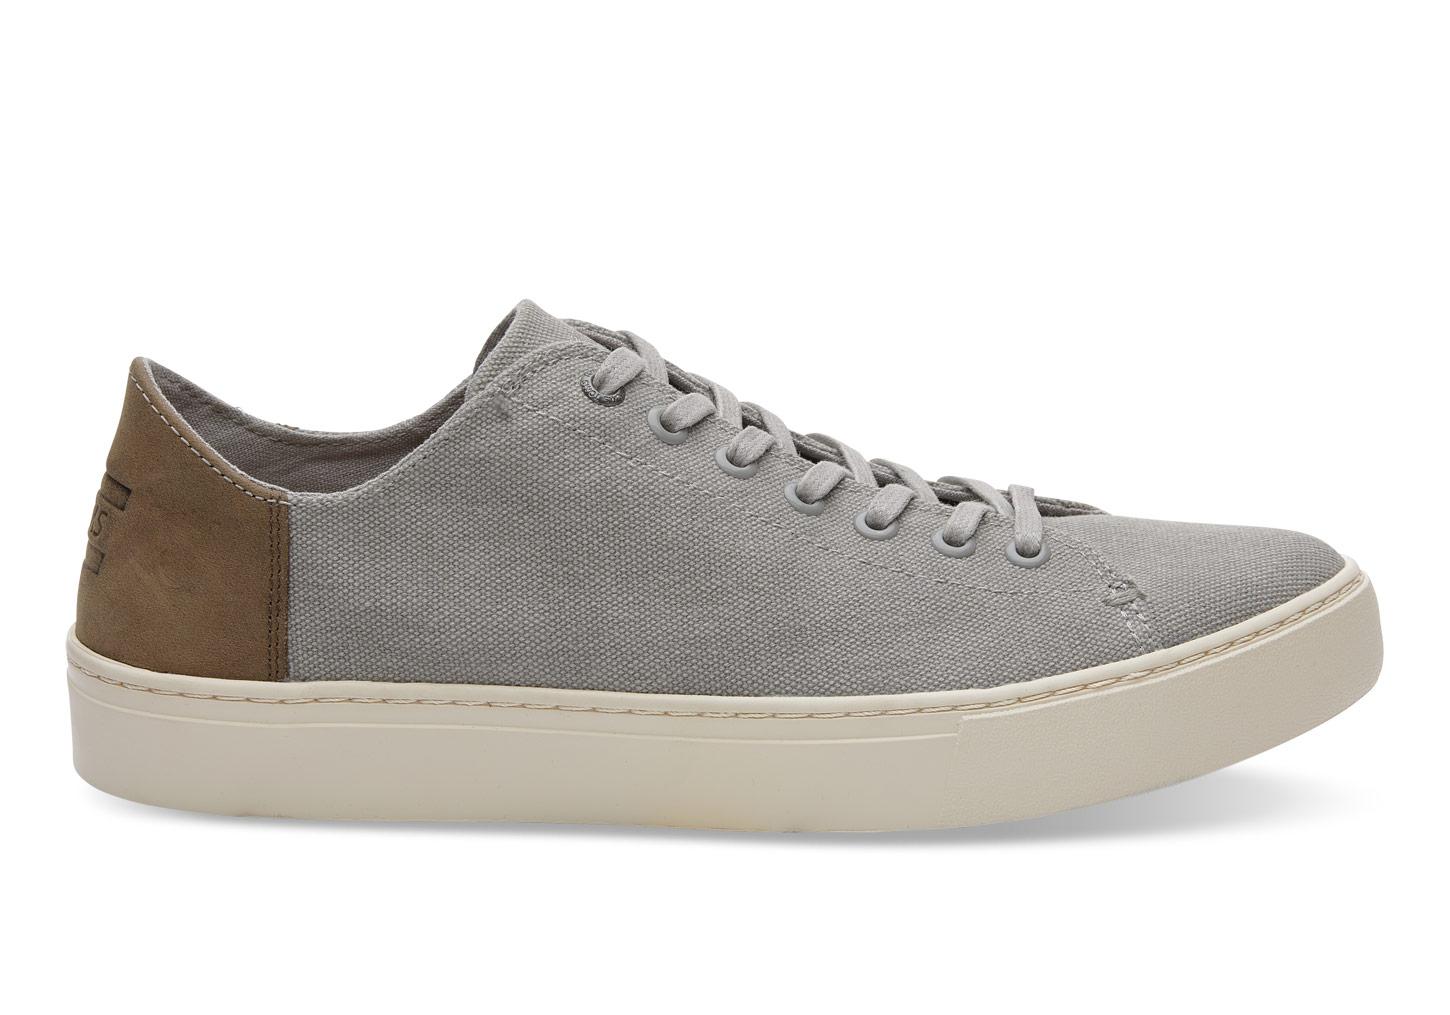 TOMS Drizzle Grey Washed Canvas Men's Lenox Sneakers in Gray for Men - Lyst